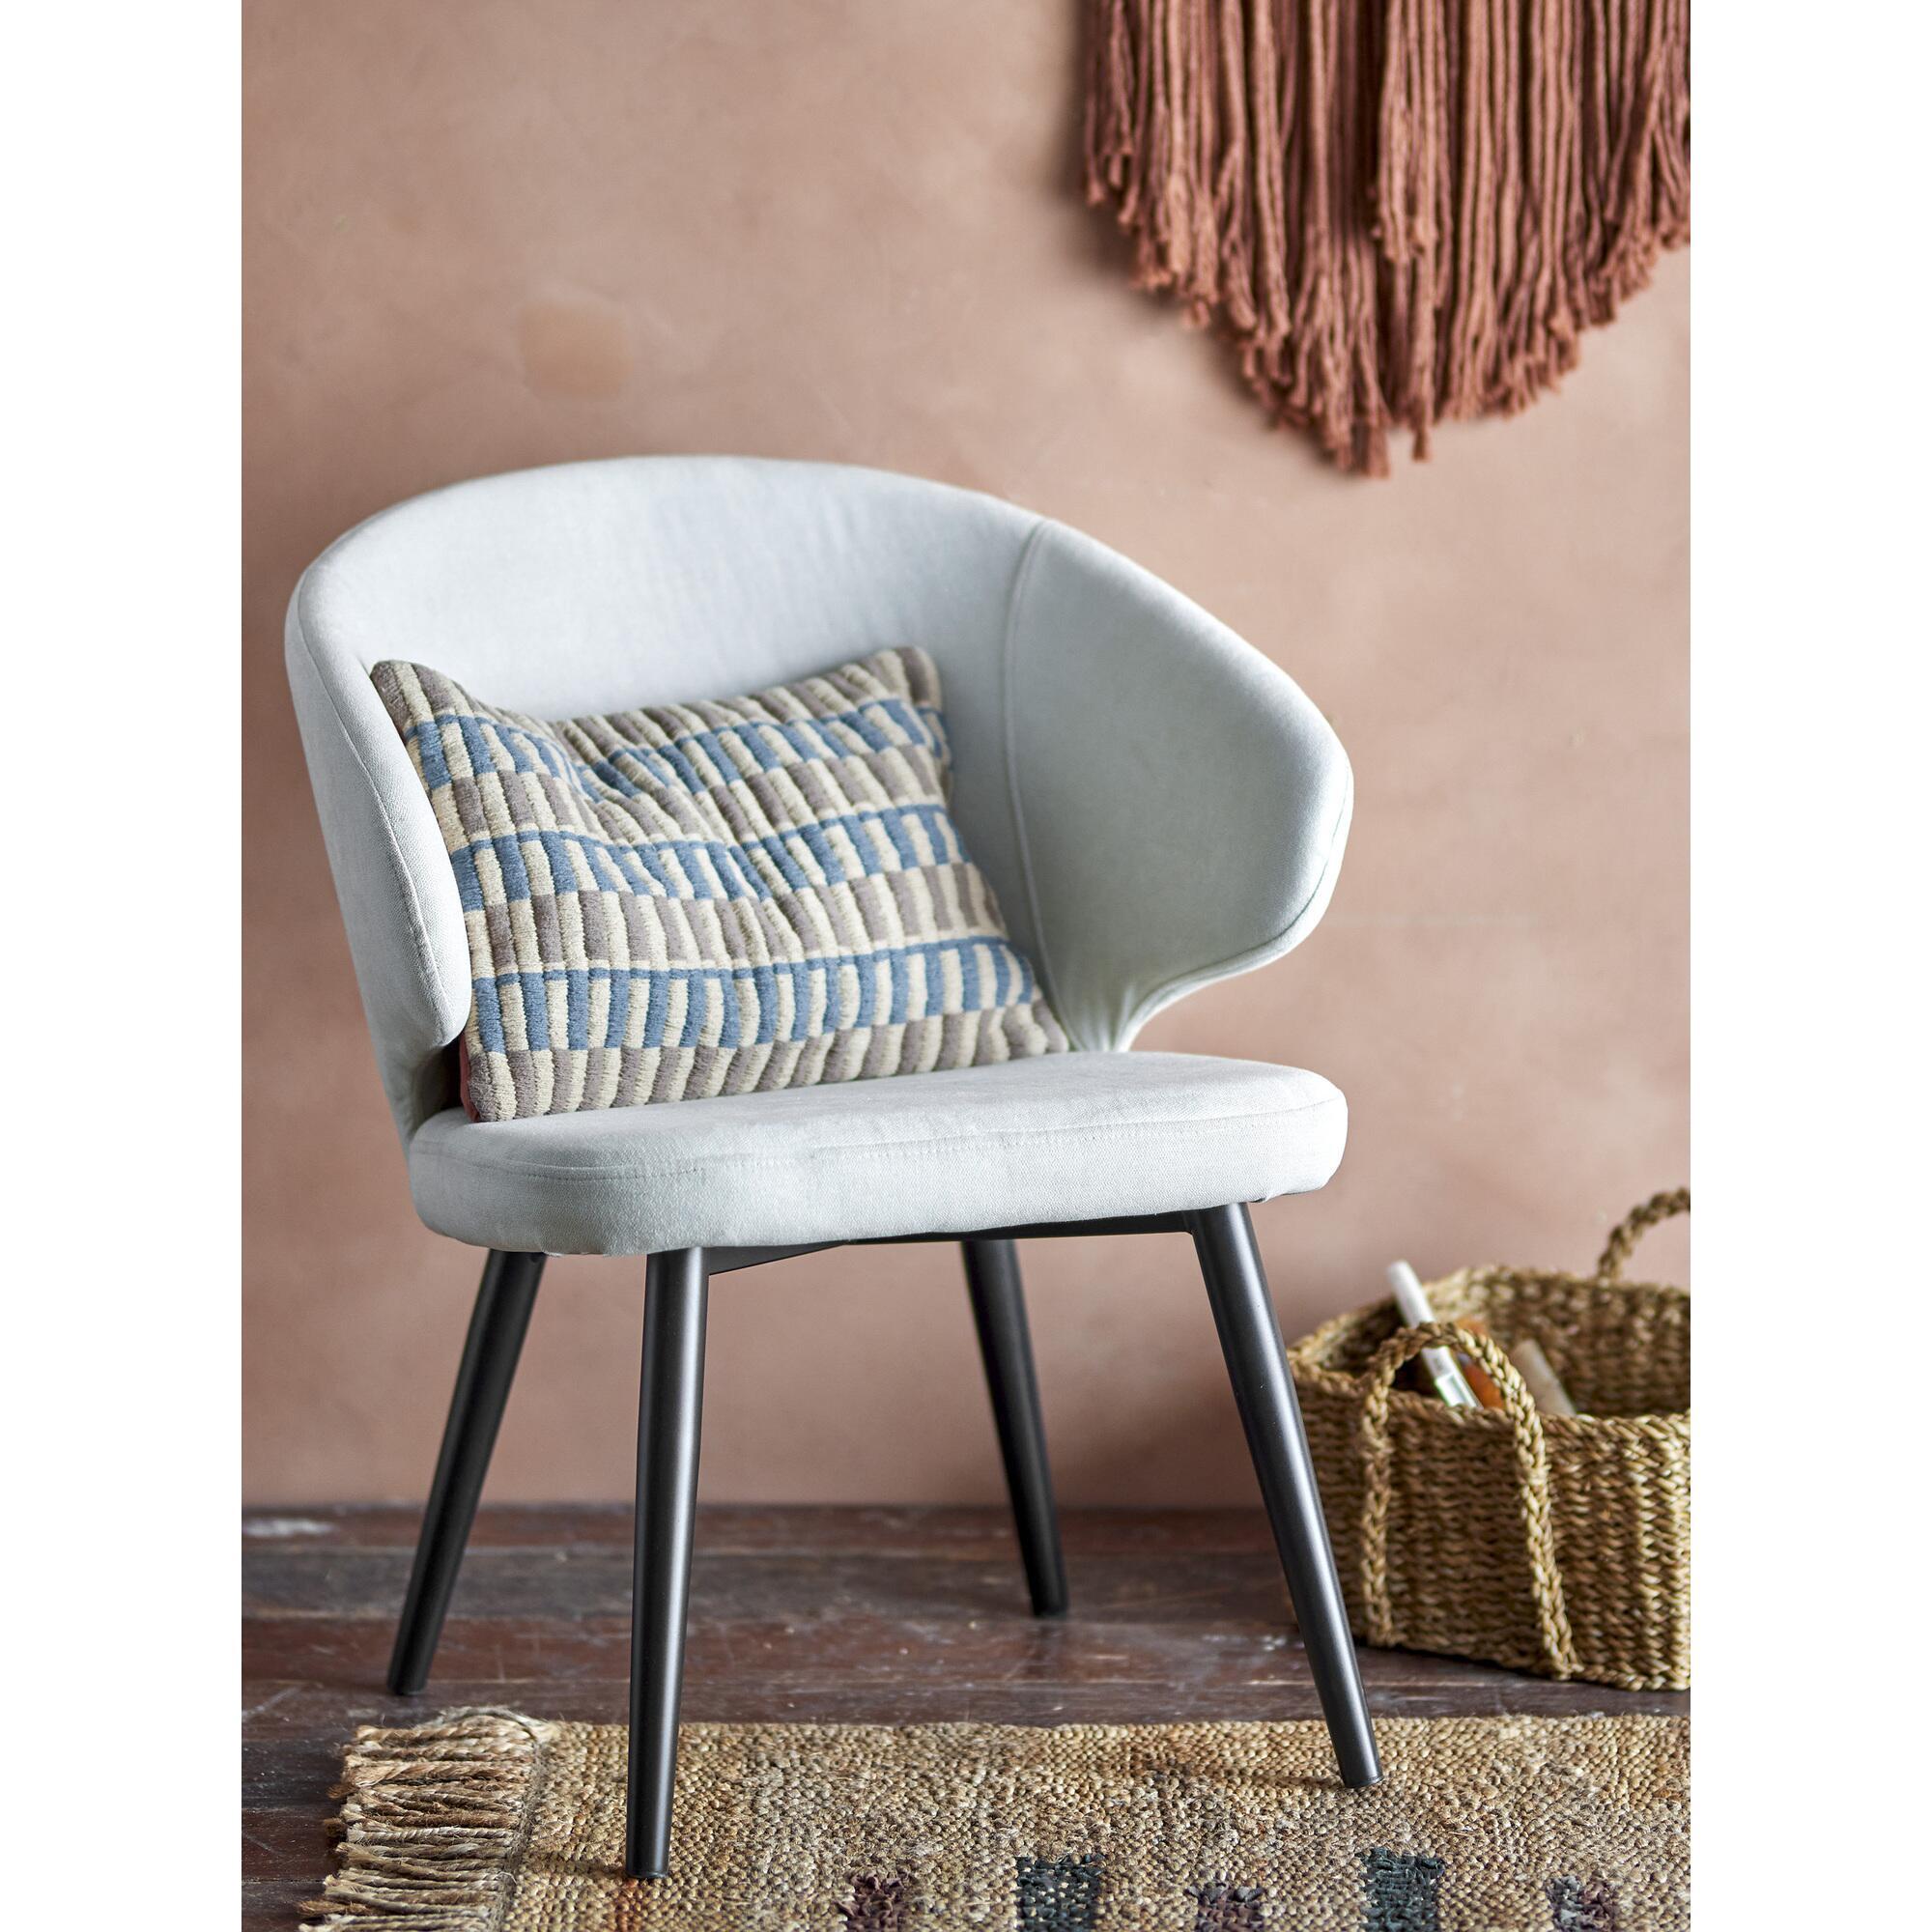  Loon Loungestol - Natur fra Creative Collection by Bloomingville i Polyester (Varenr: 82064236)